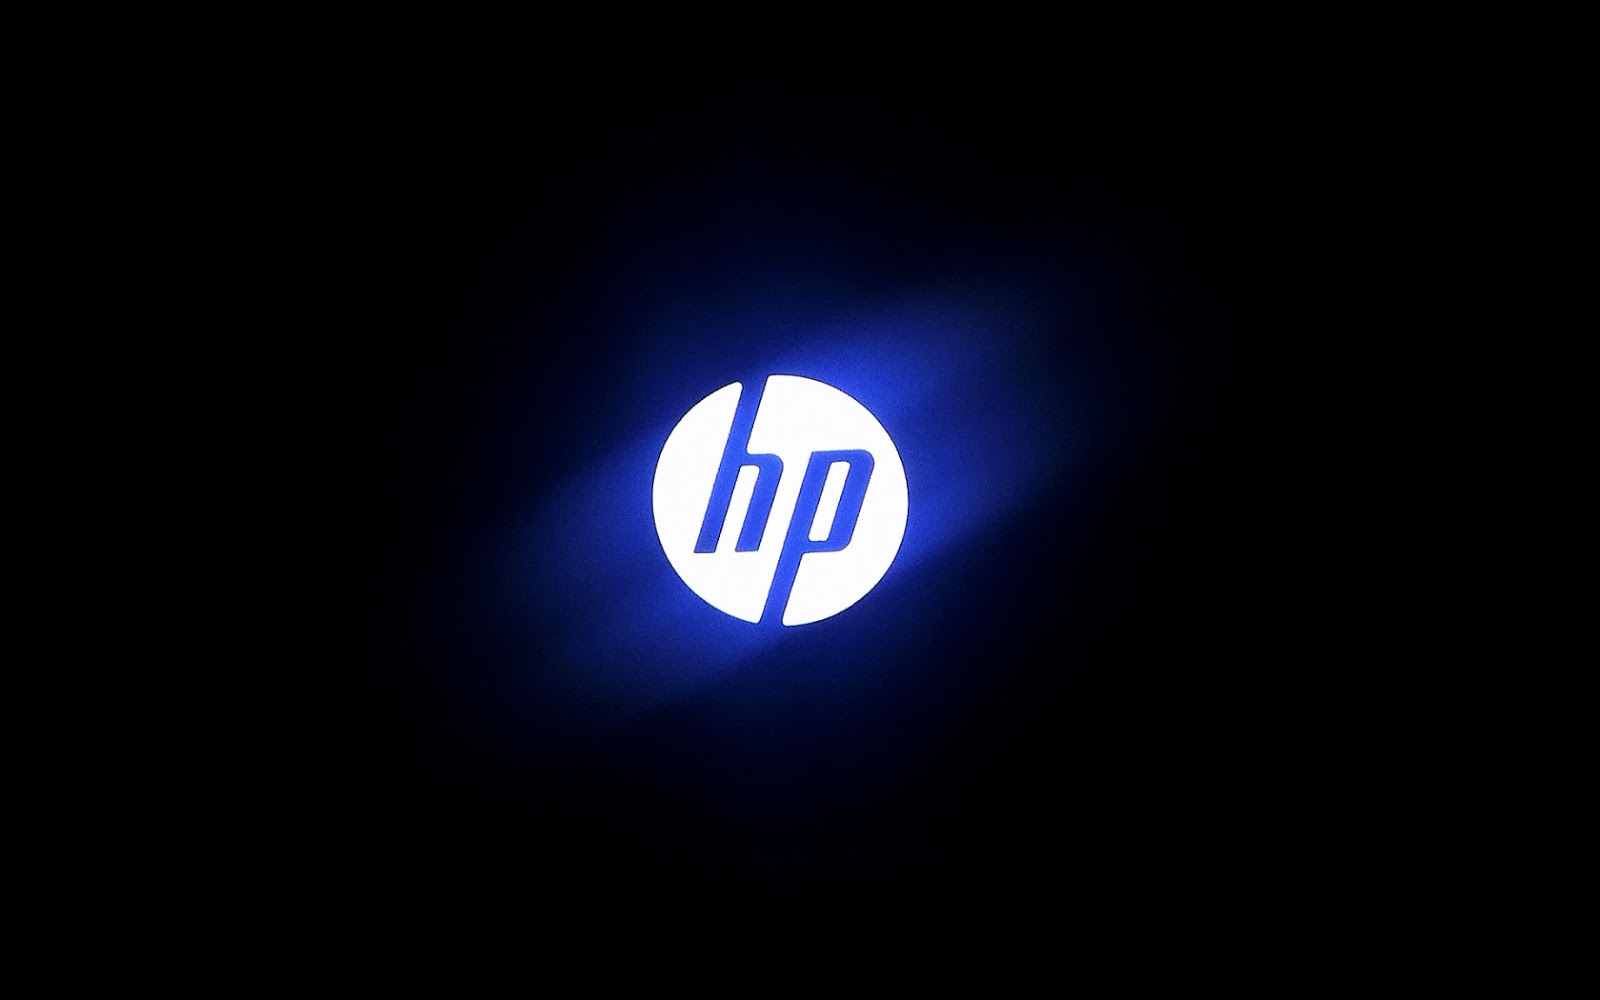 Hp Wallpaper For And You Can Also Share These